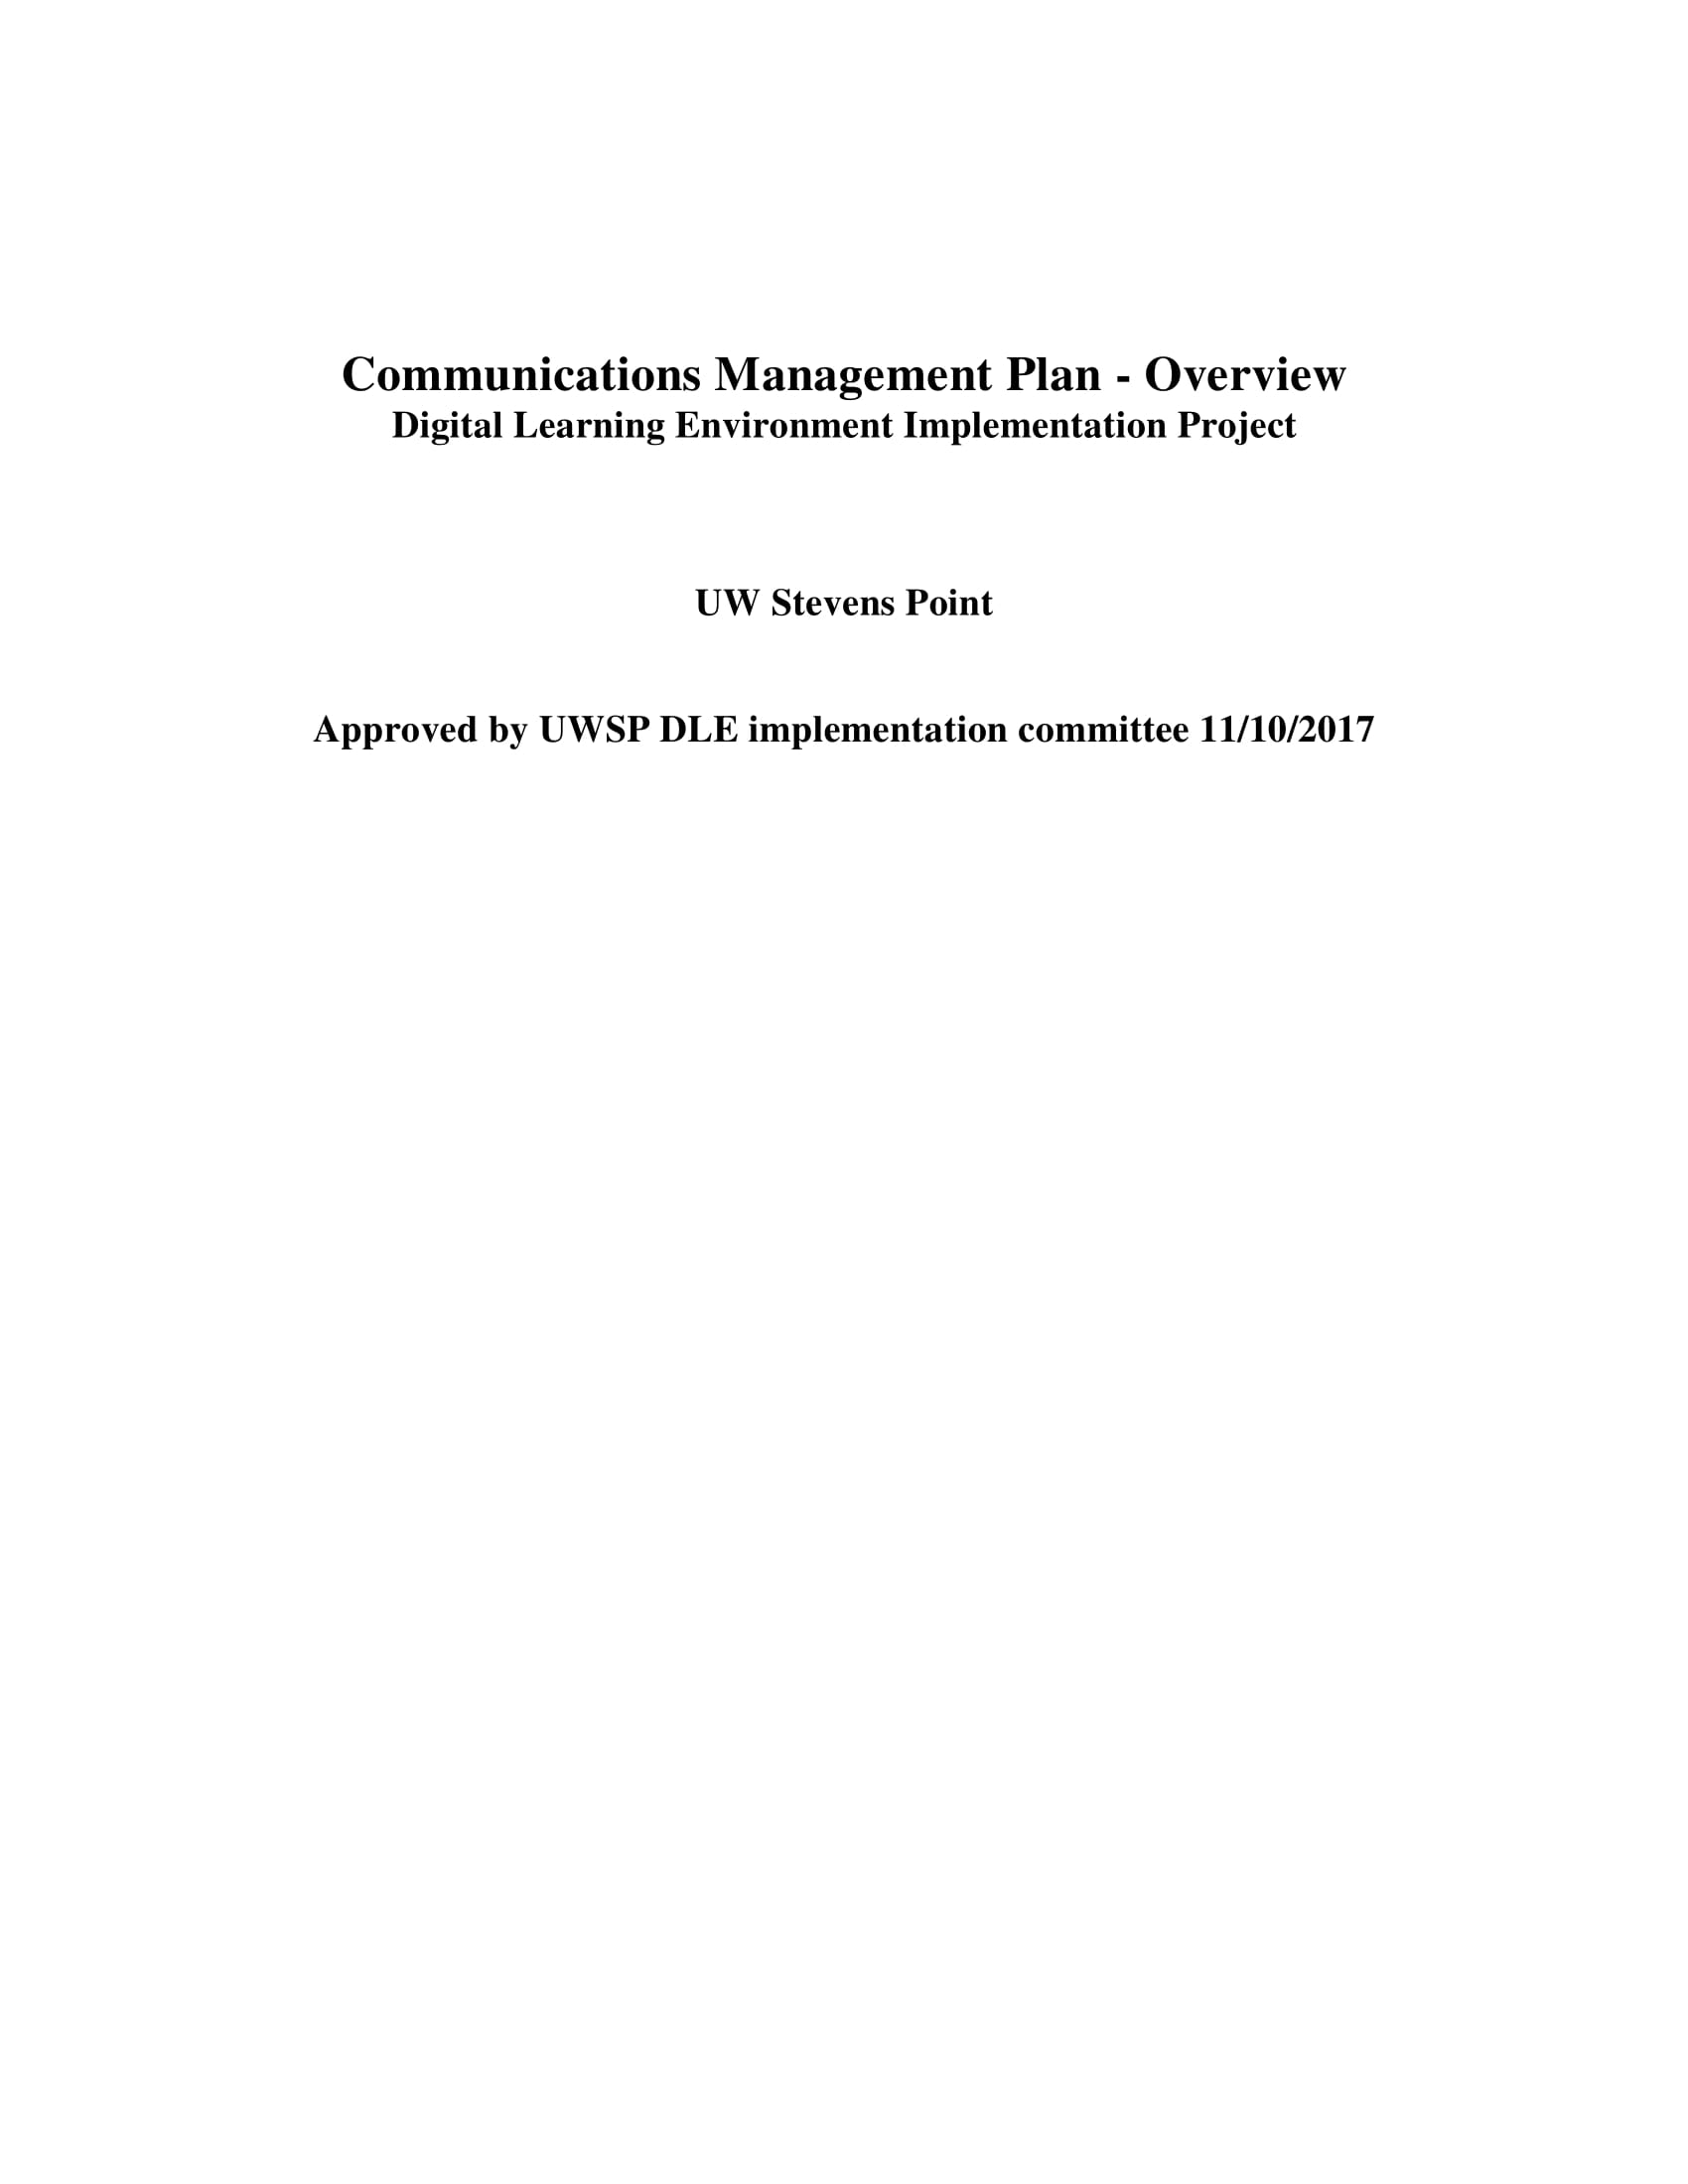 Complete Communication Management Plan Template Example